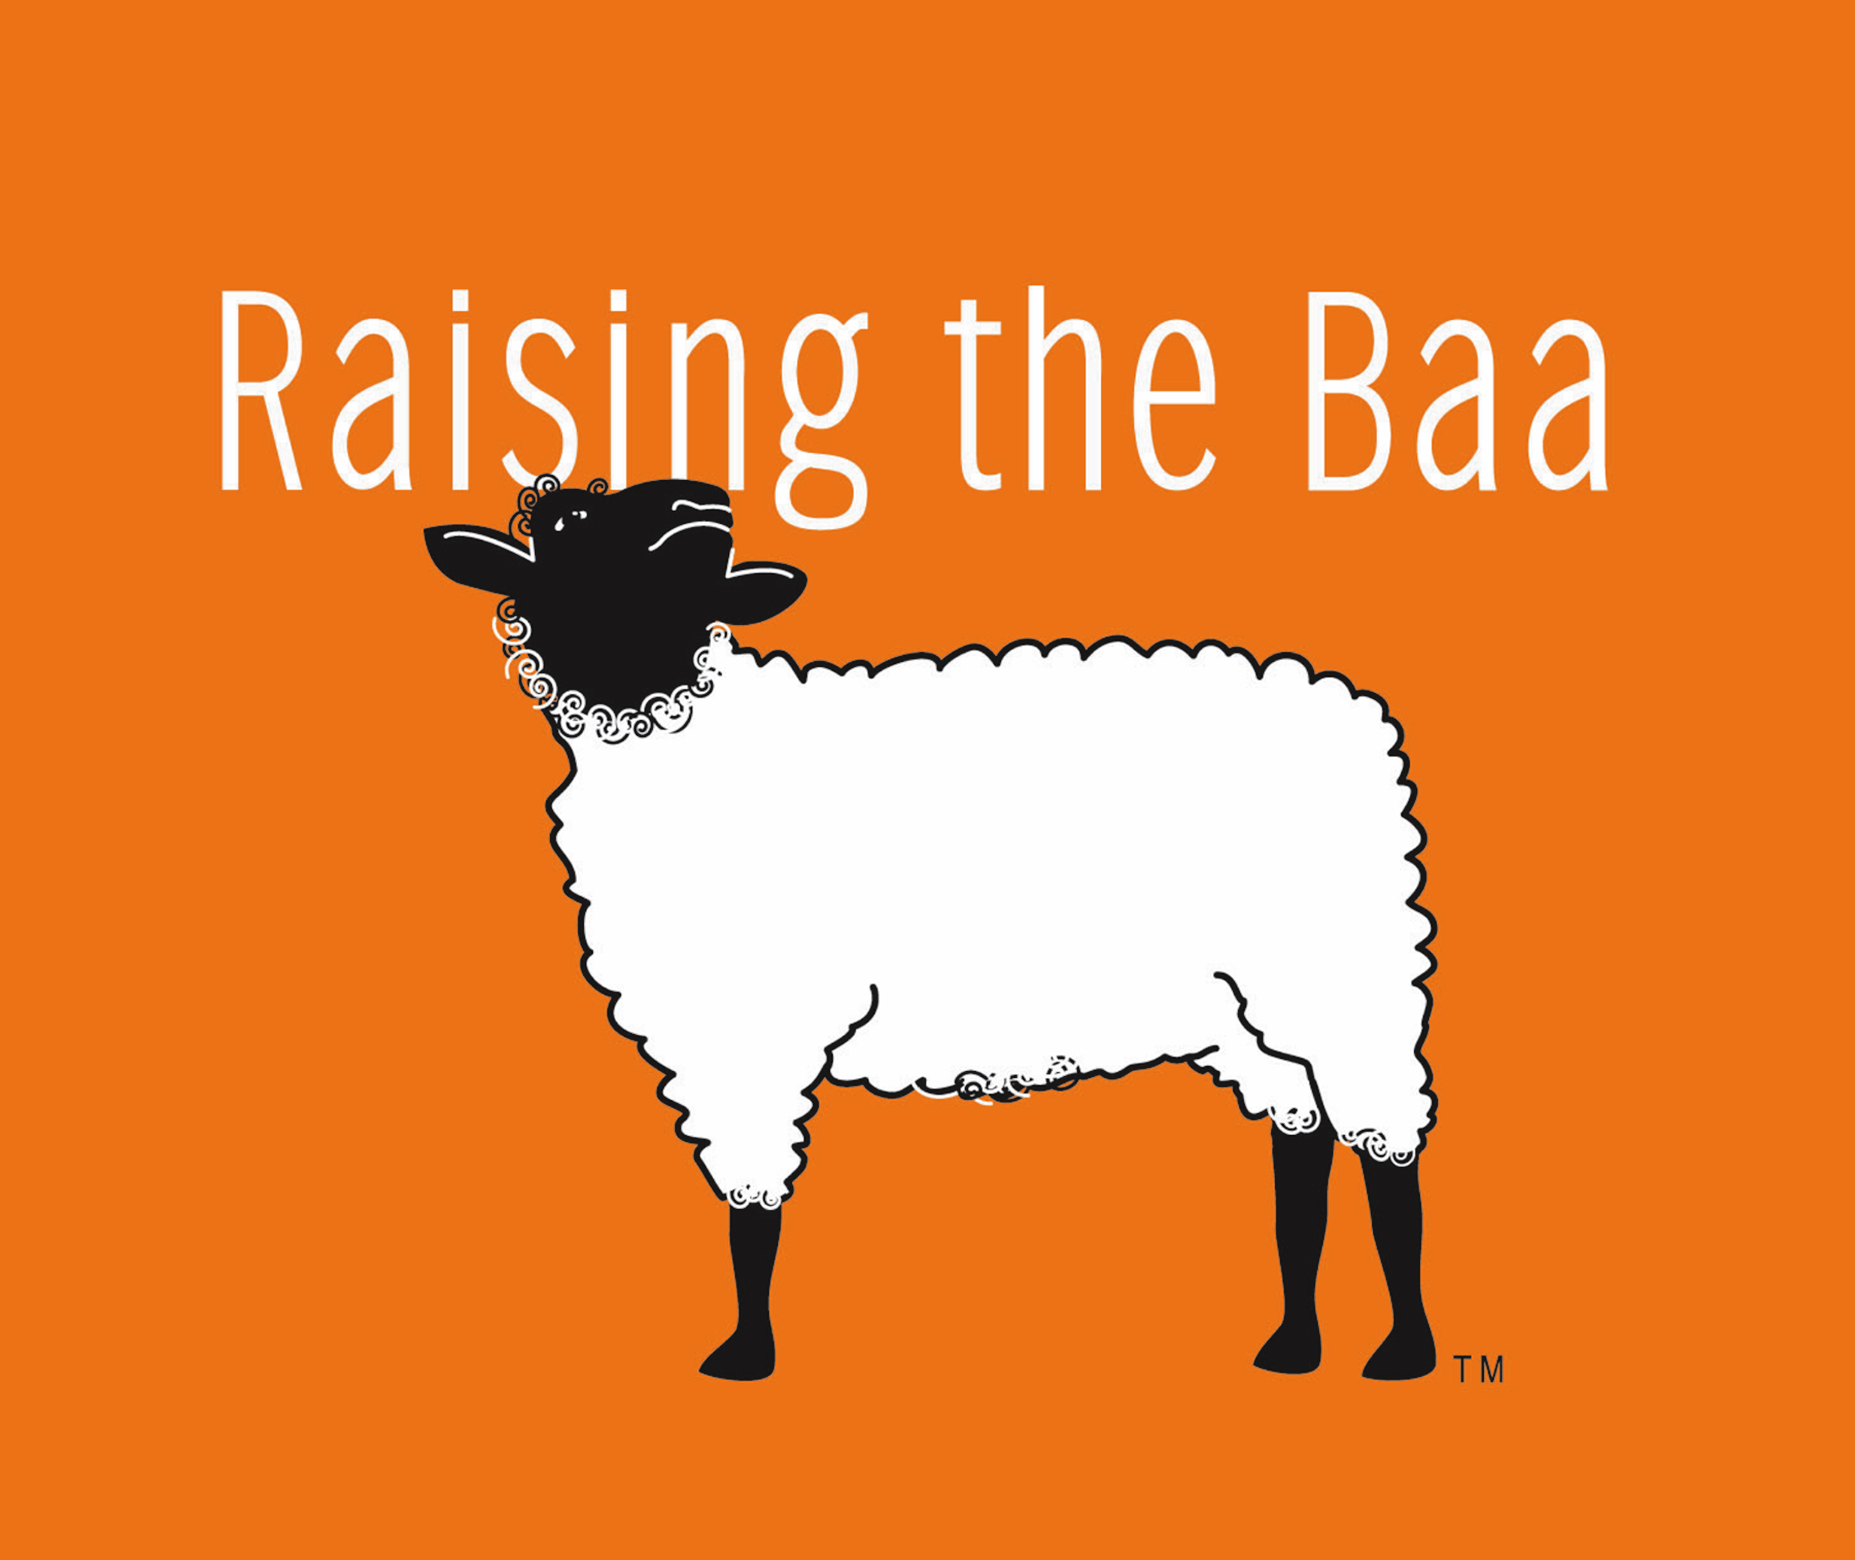 So what's in store for business in the Year of the Sheep? - RTB-Logo